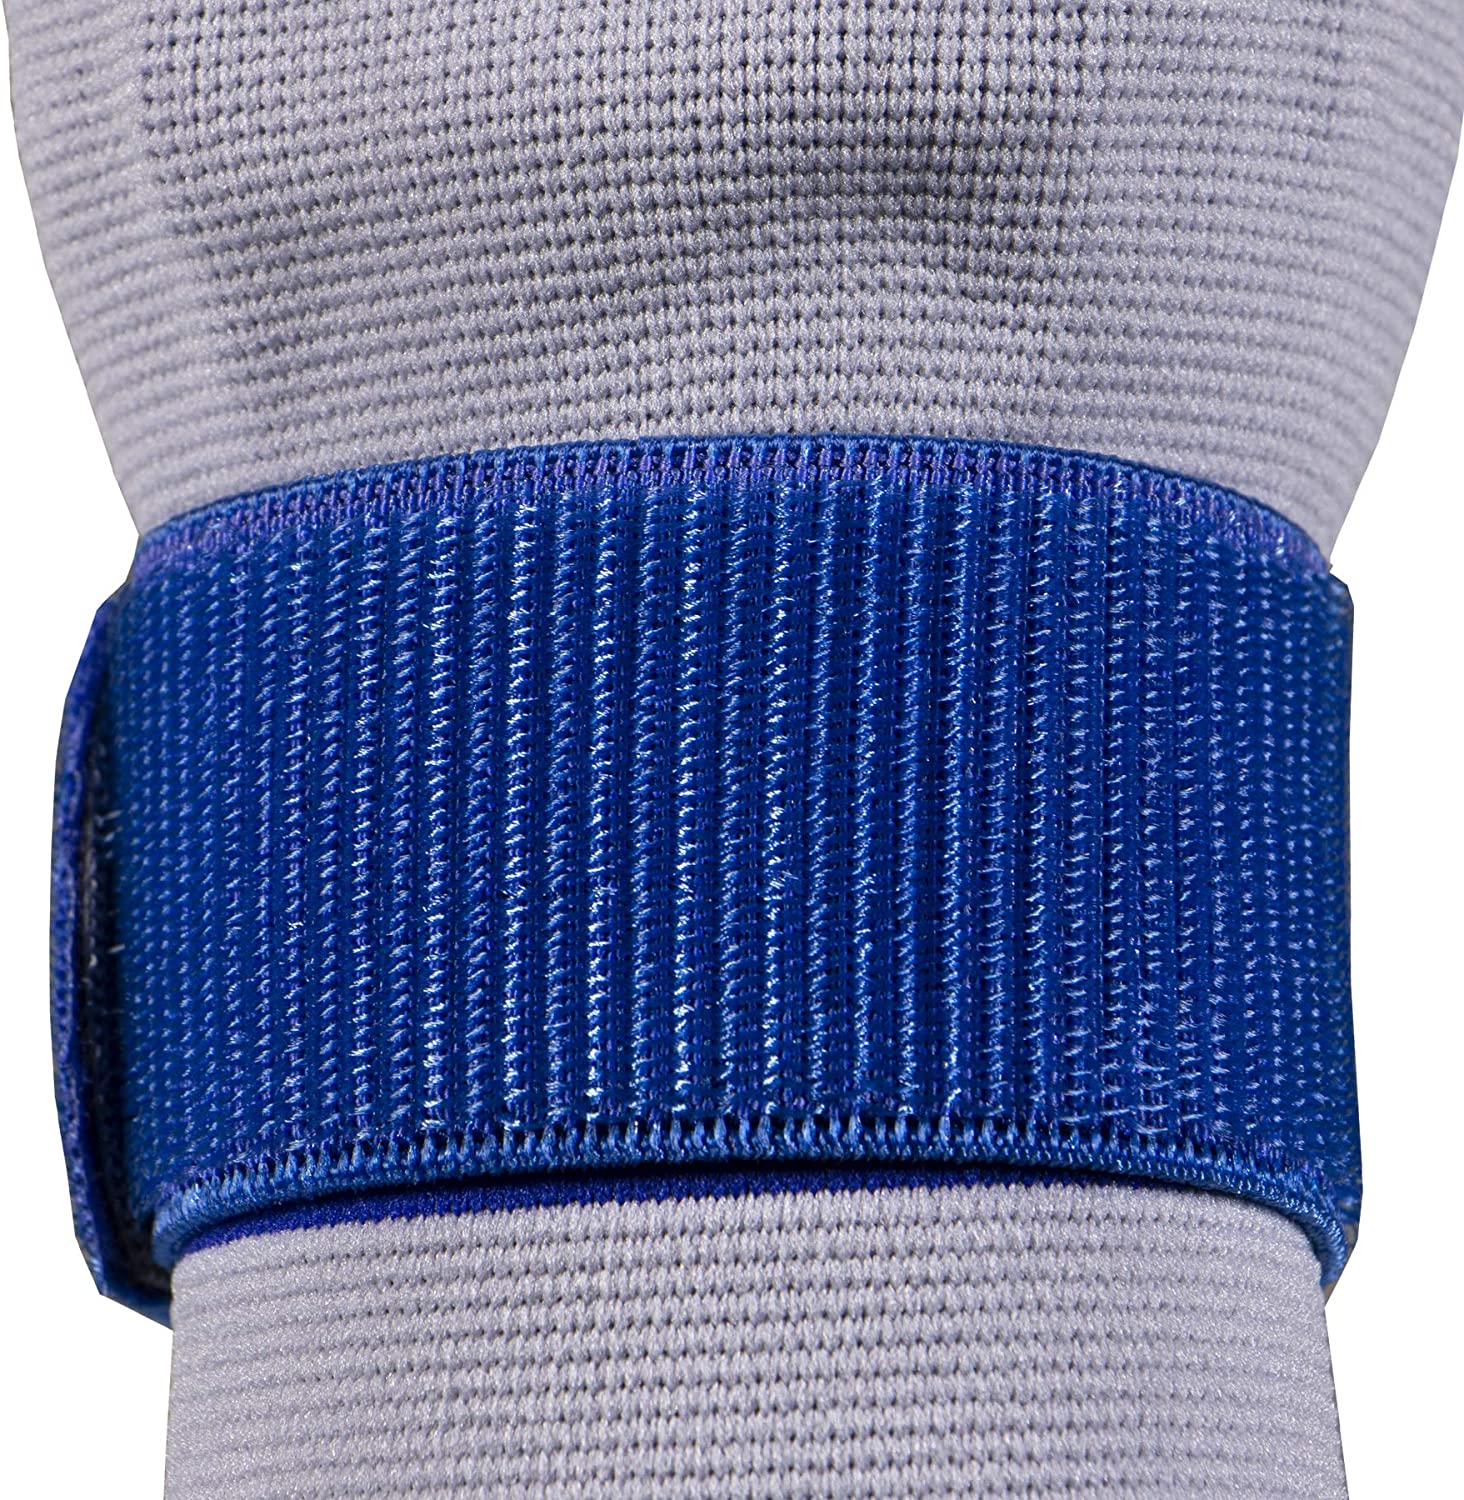 Champion Elastic Wrist Support With Encircling Strap - Midwest DME Supply